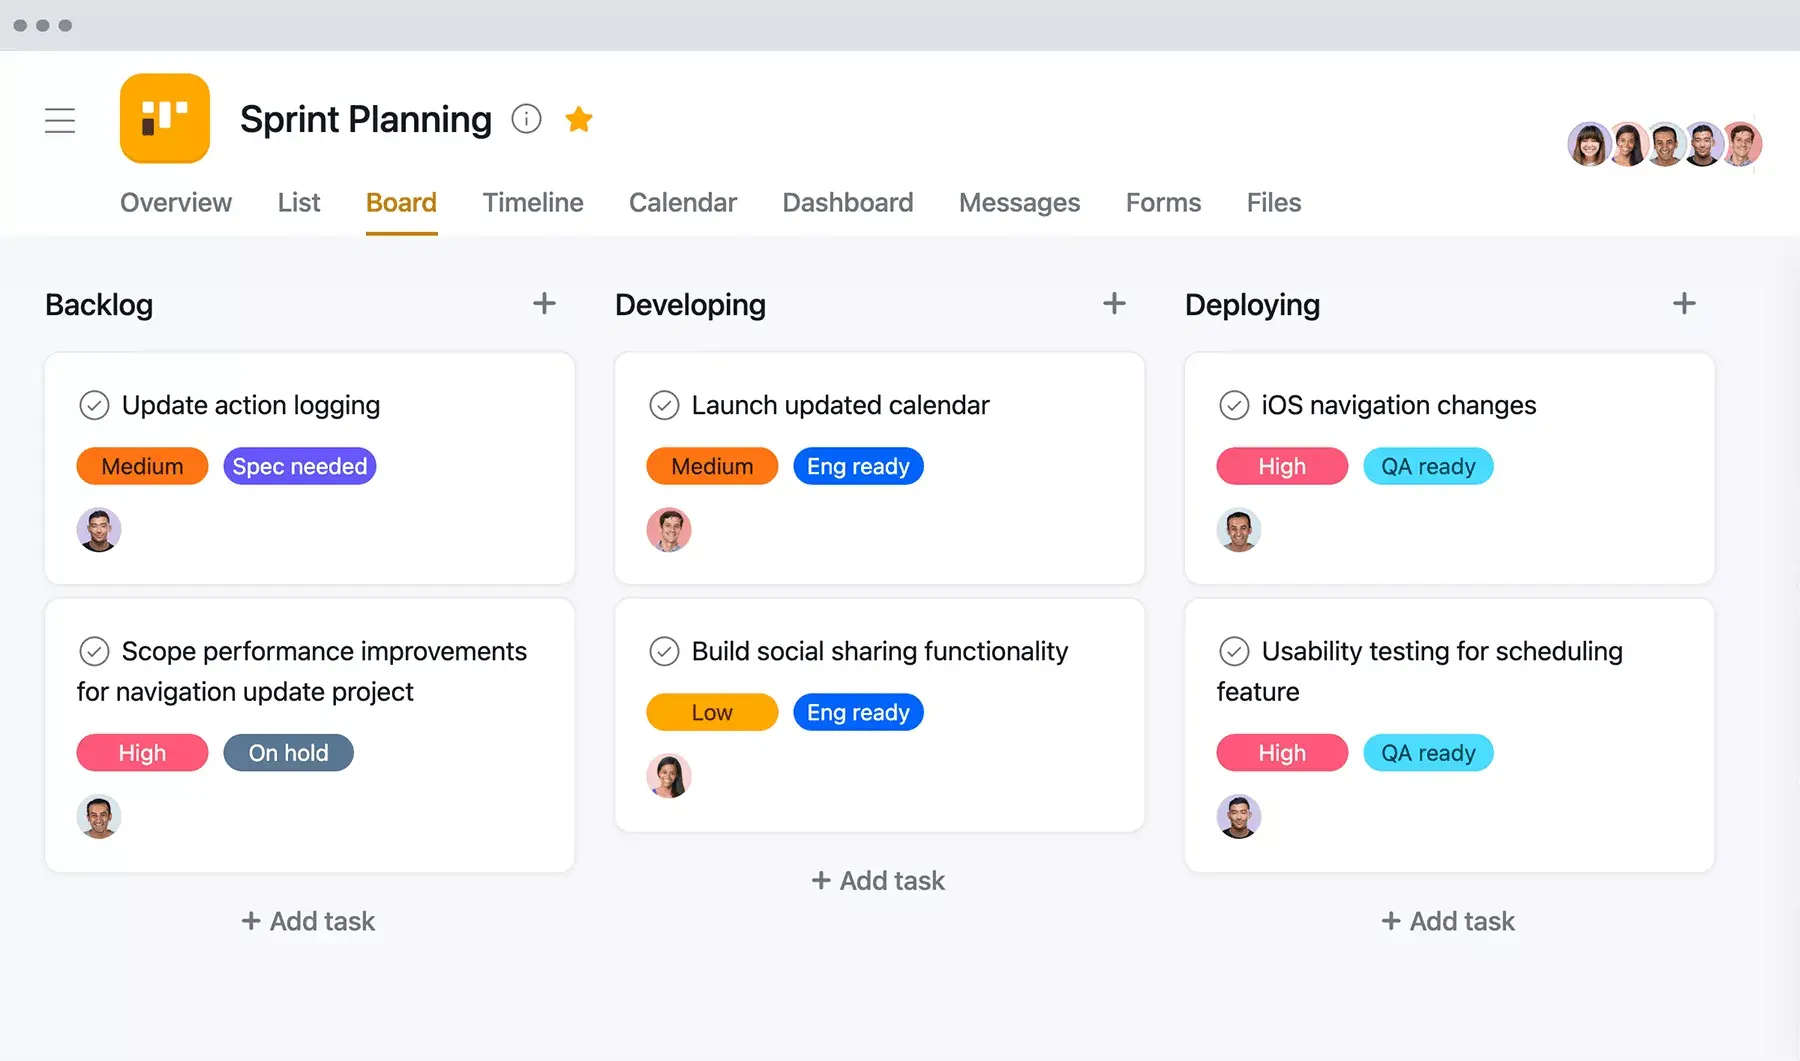 [Old Product UI] Sprint planning in Asana - Sprint backlog project in a Kanban board view (Boards)